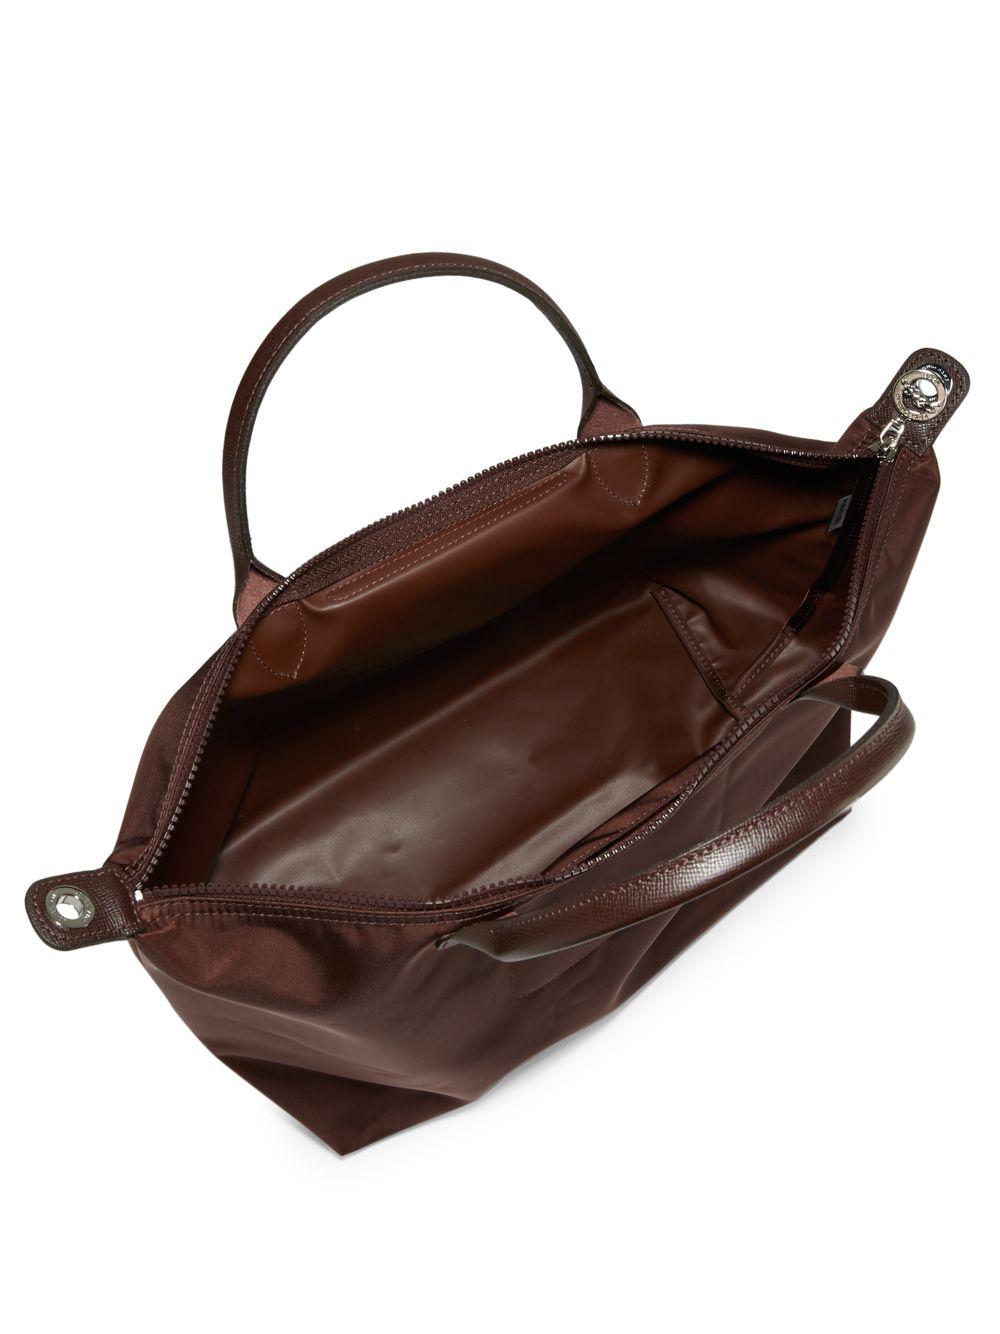 Pliage Neo Tote Bag in Chocolate (Brown 